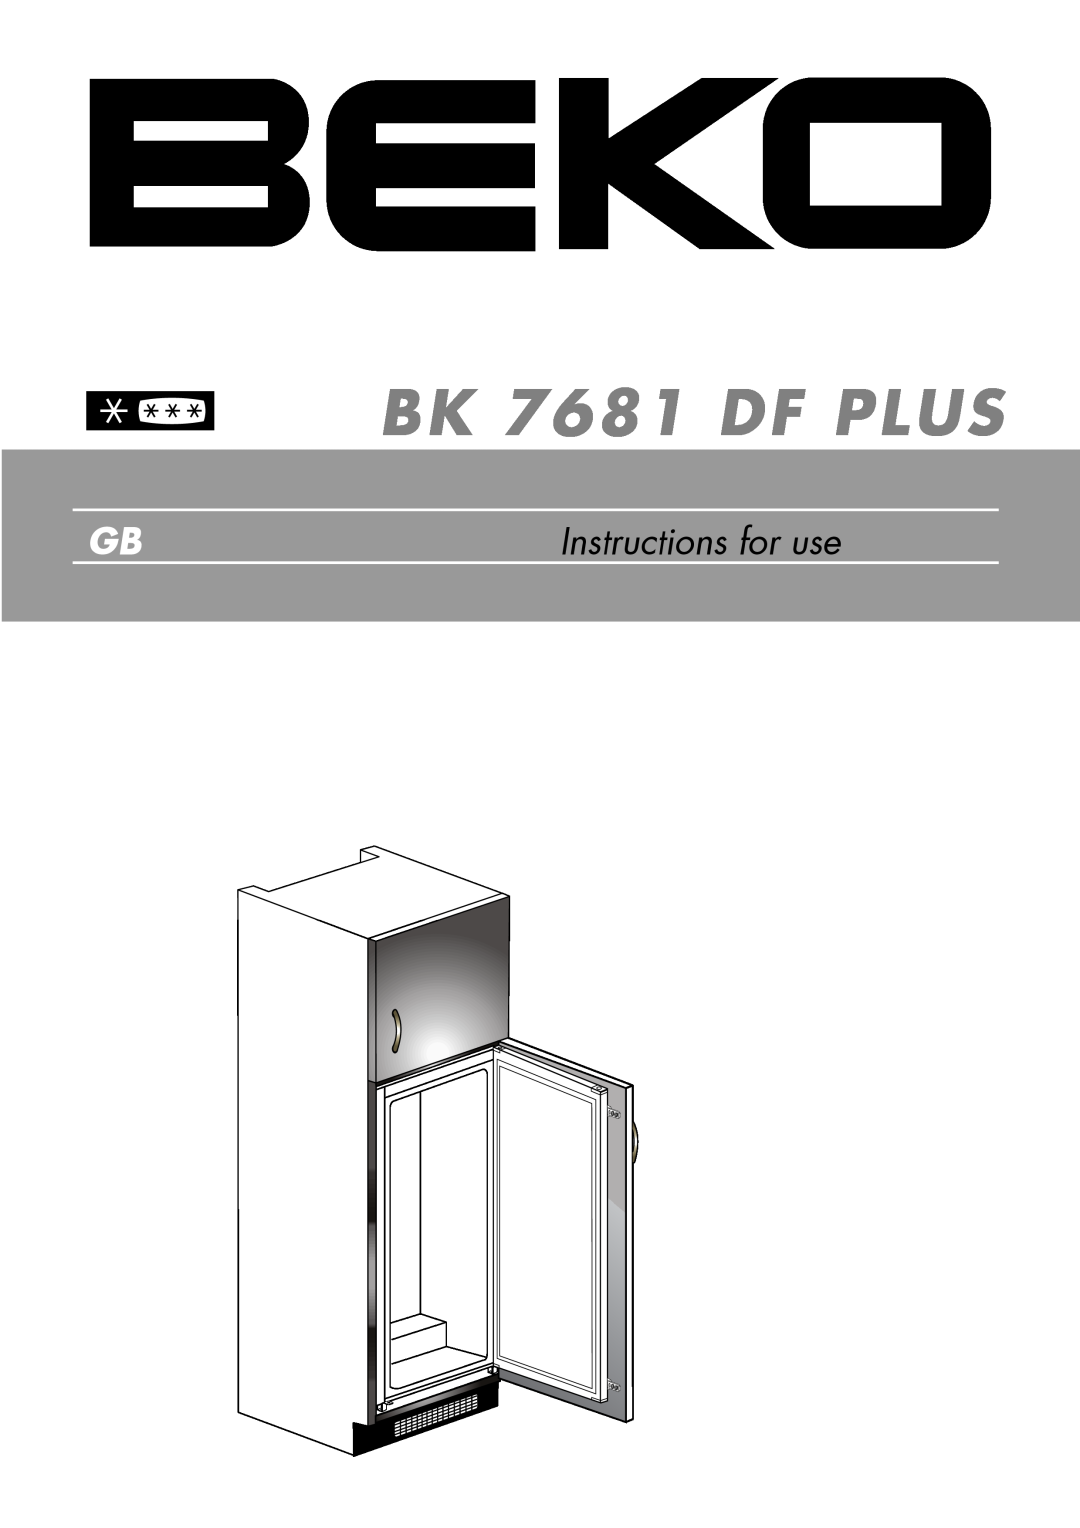 Beko manual Instructions for use, BK 7681 DF PLUS 